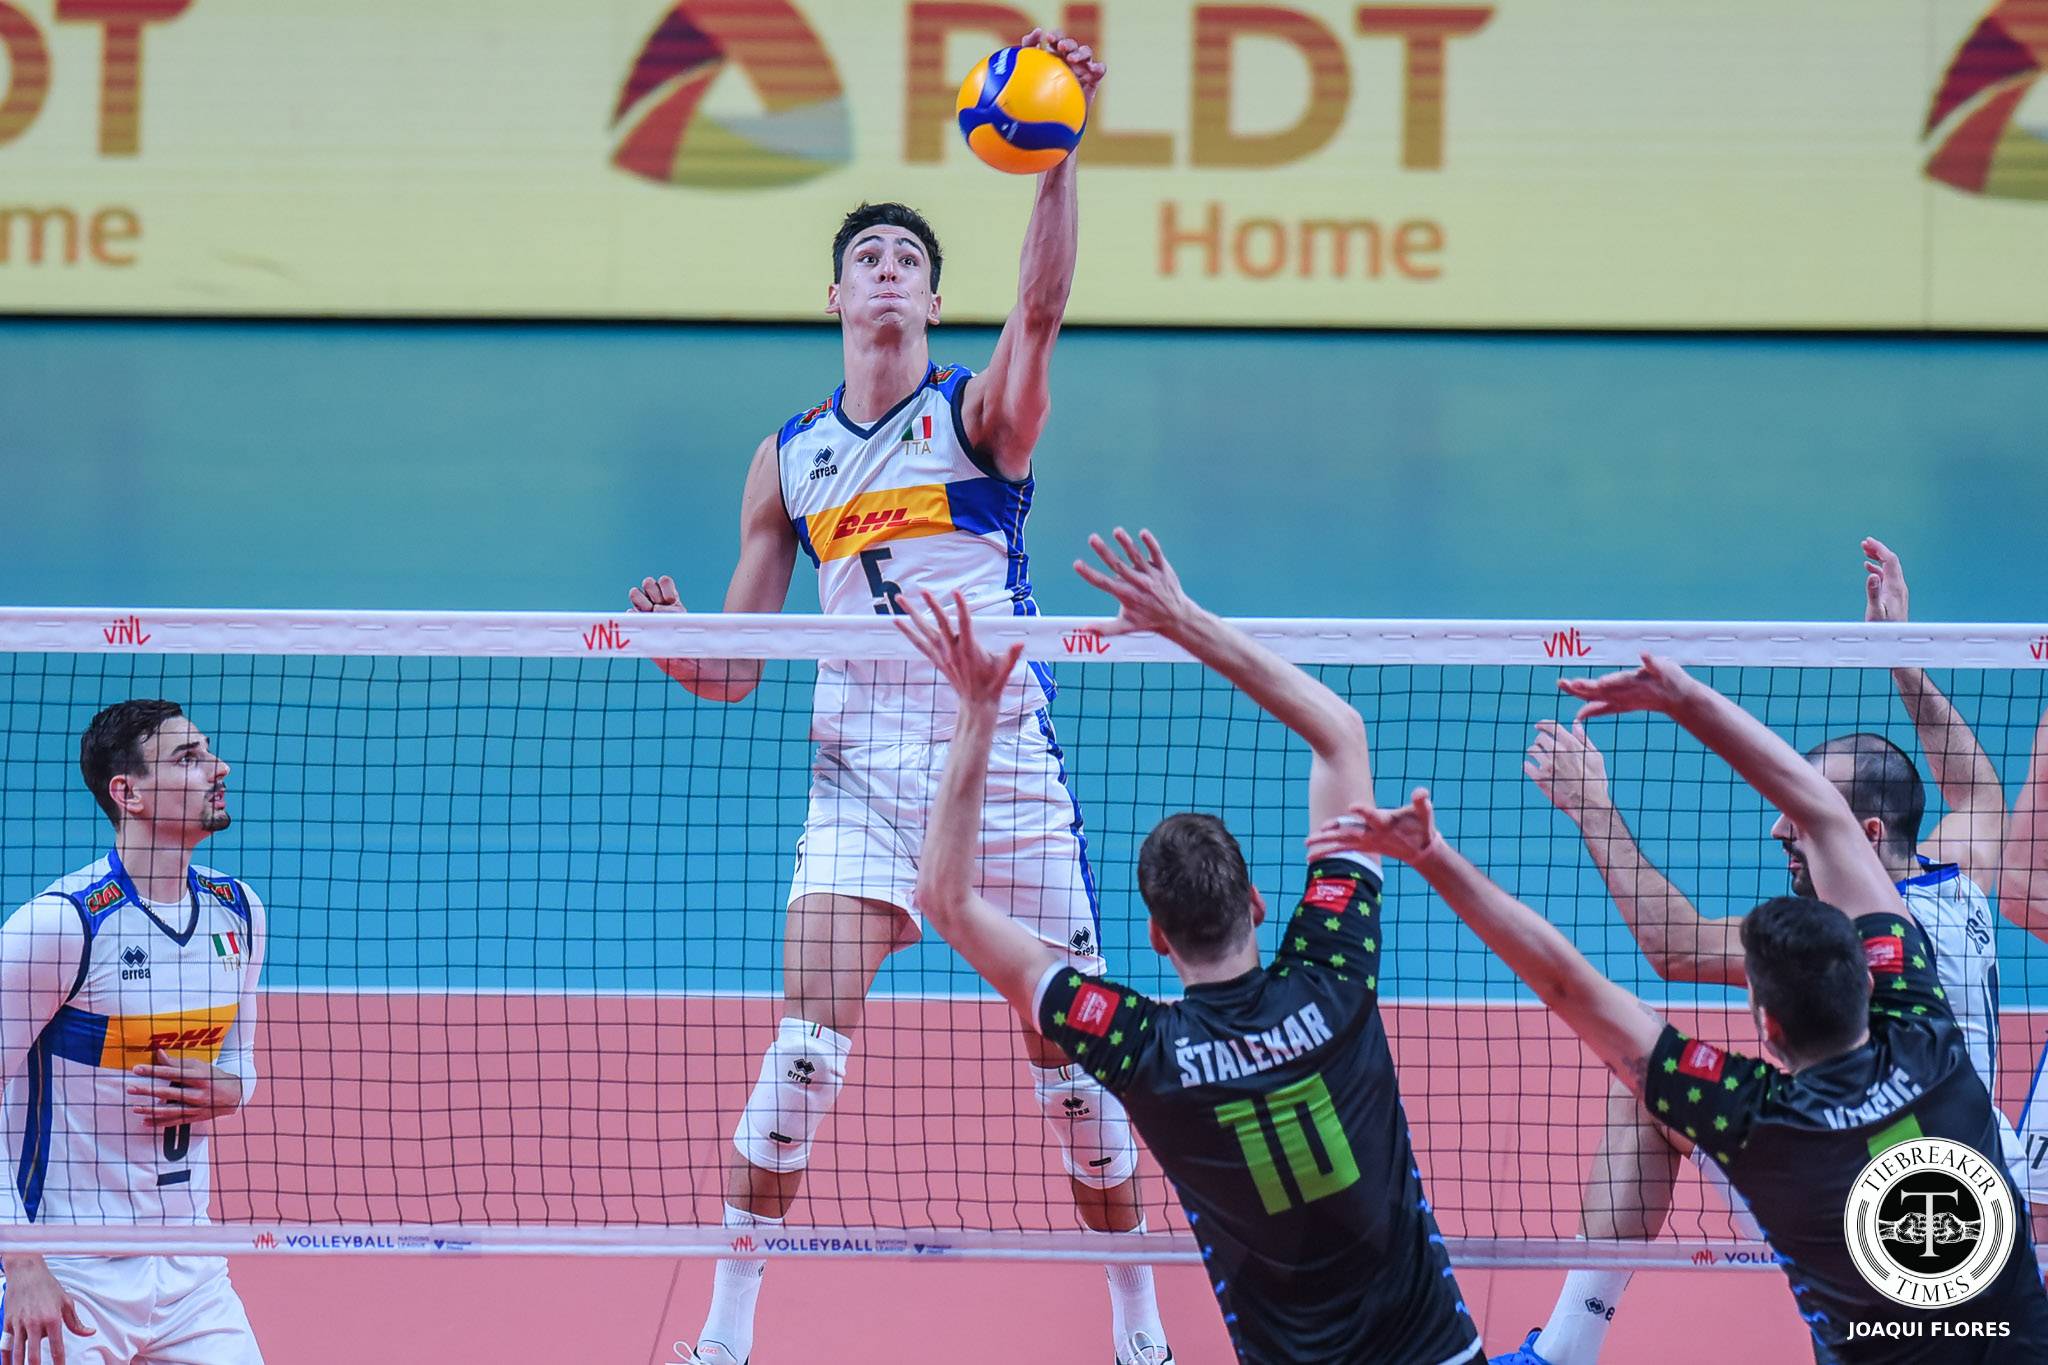 VNL Italy makes swift work of Slovenia in rematch of European championship